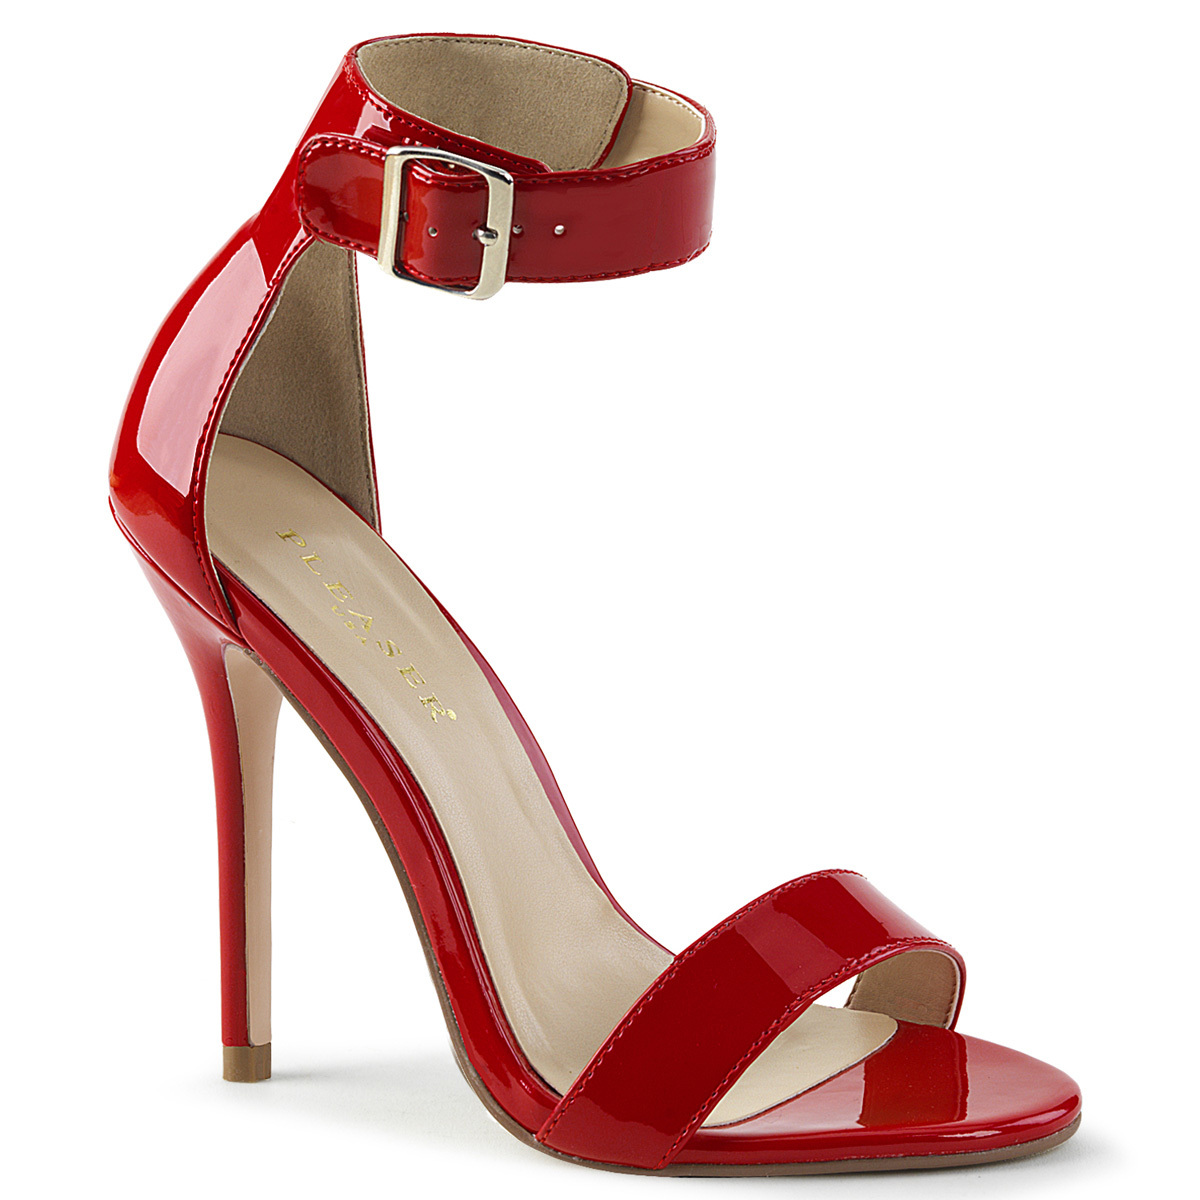 PLEASER Amuse-10 Series 5in Heel Ankle-Strap Sandal - Red Patent ...